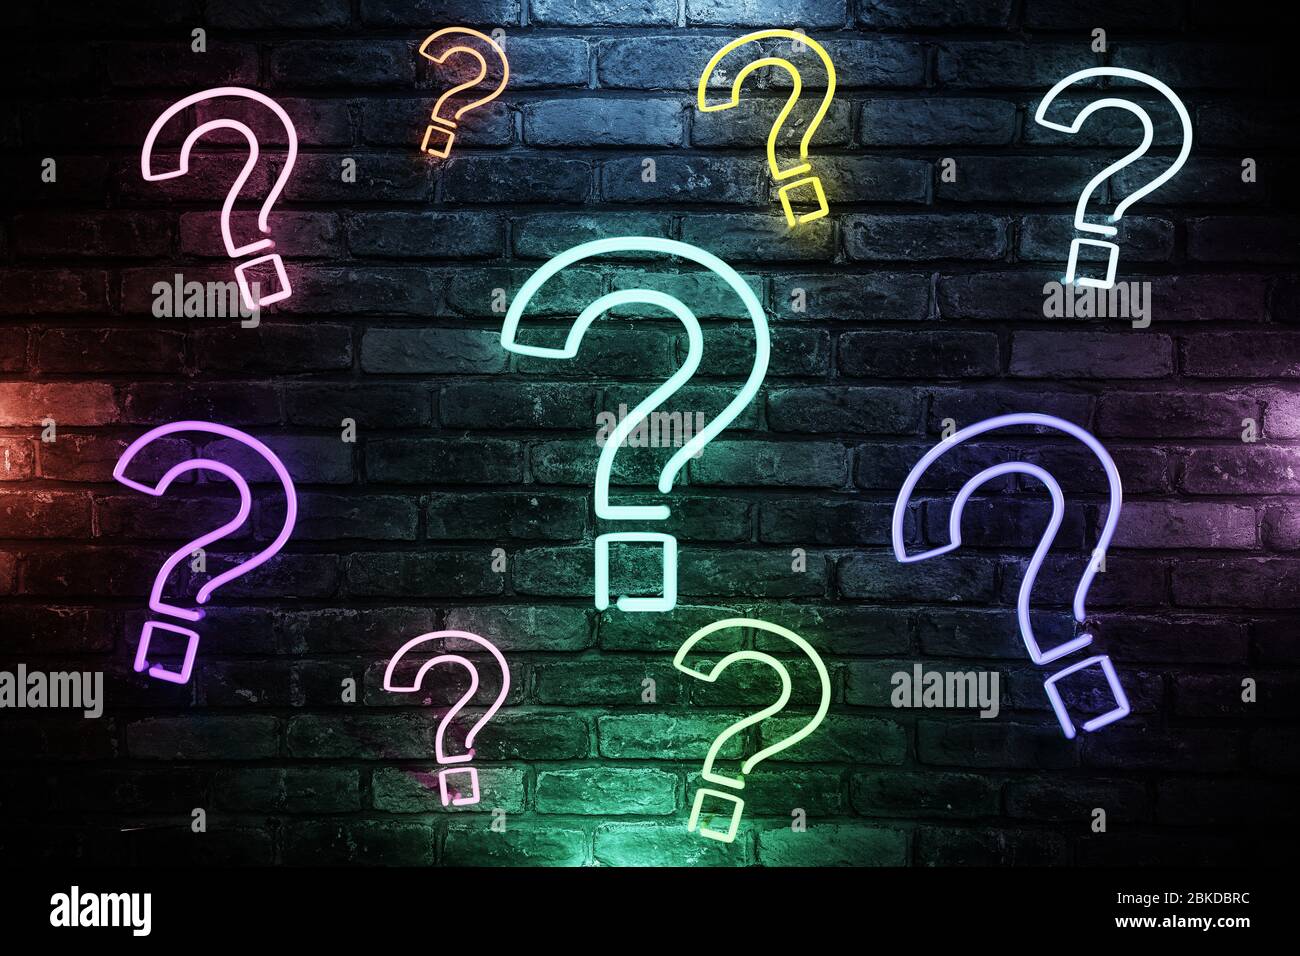 Many 3D illustrated question mark with led light on brick wall background  Stock Photo - Alamy